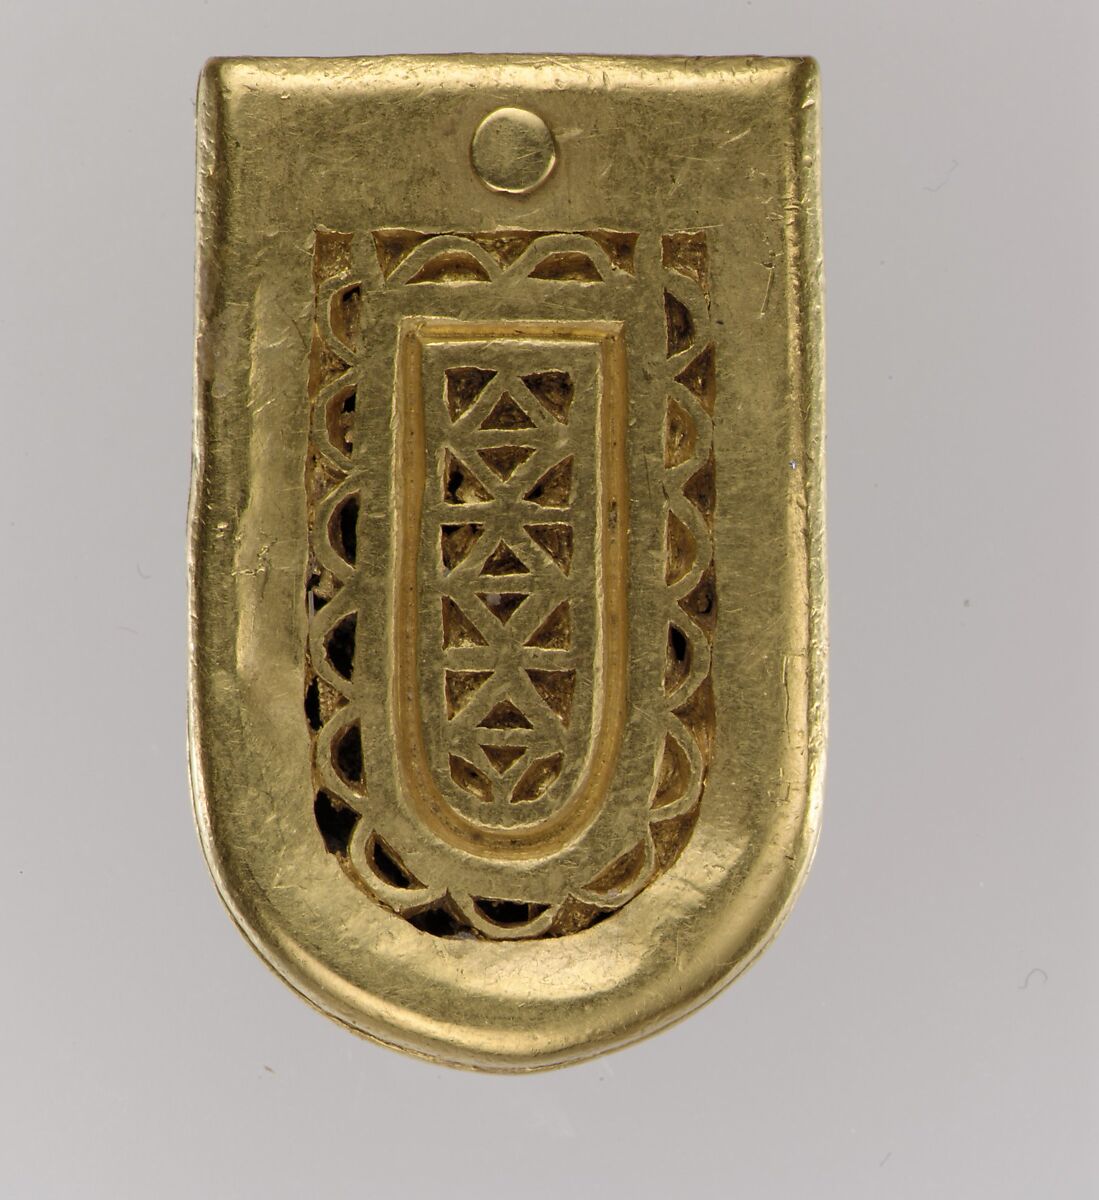 Gold Belt Buckle and Strap End, Gold, Langobardic 